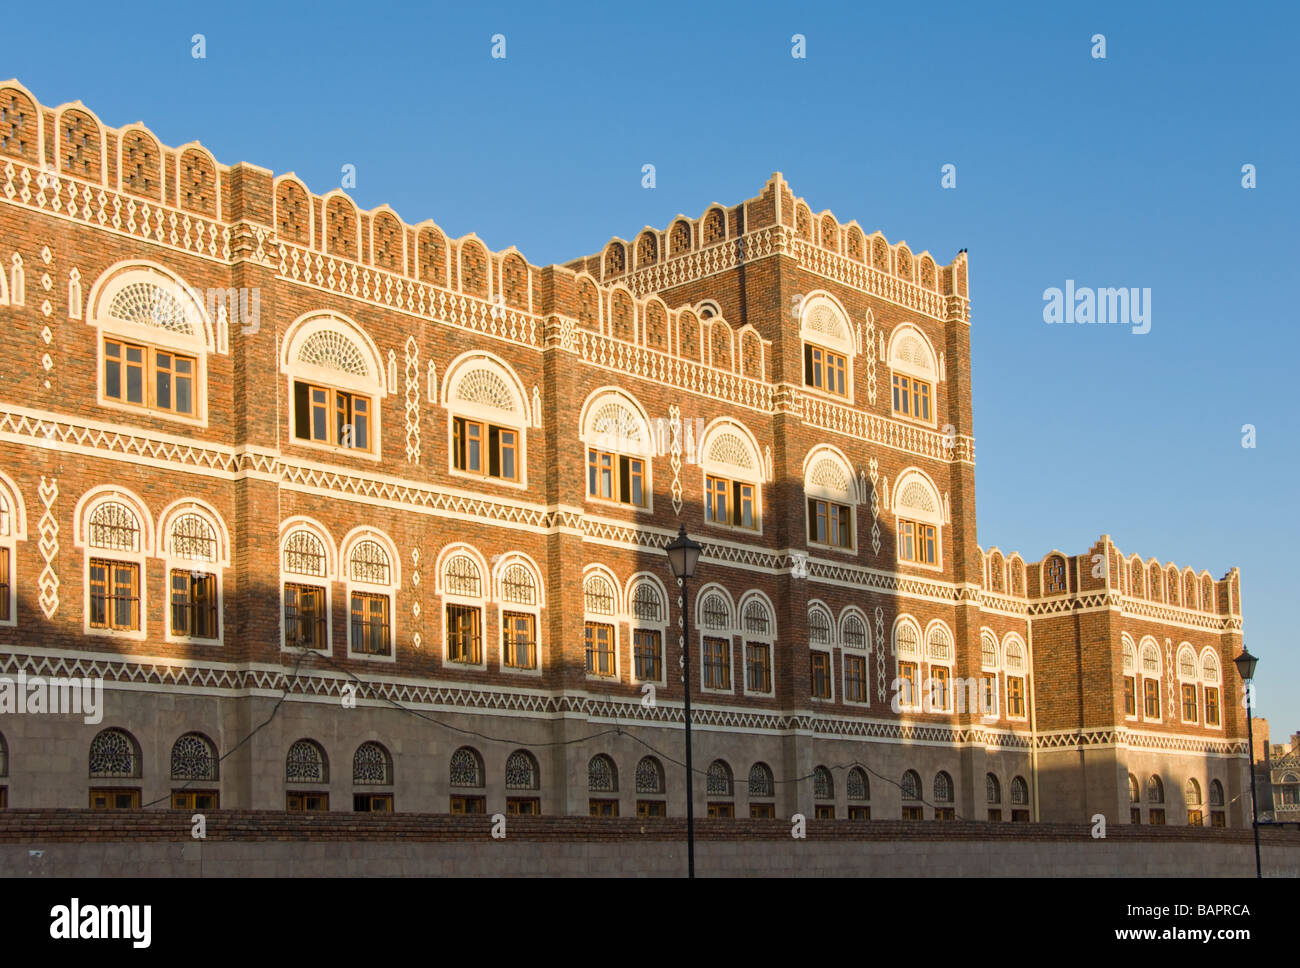 Traditional buildings in the old town district of Sana'a Yemen Stock Photo